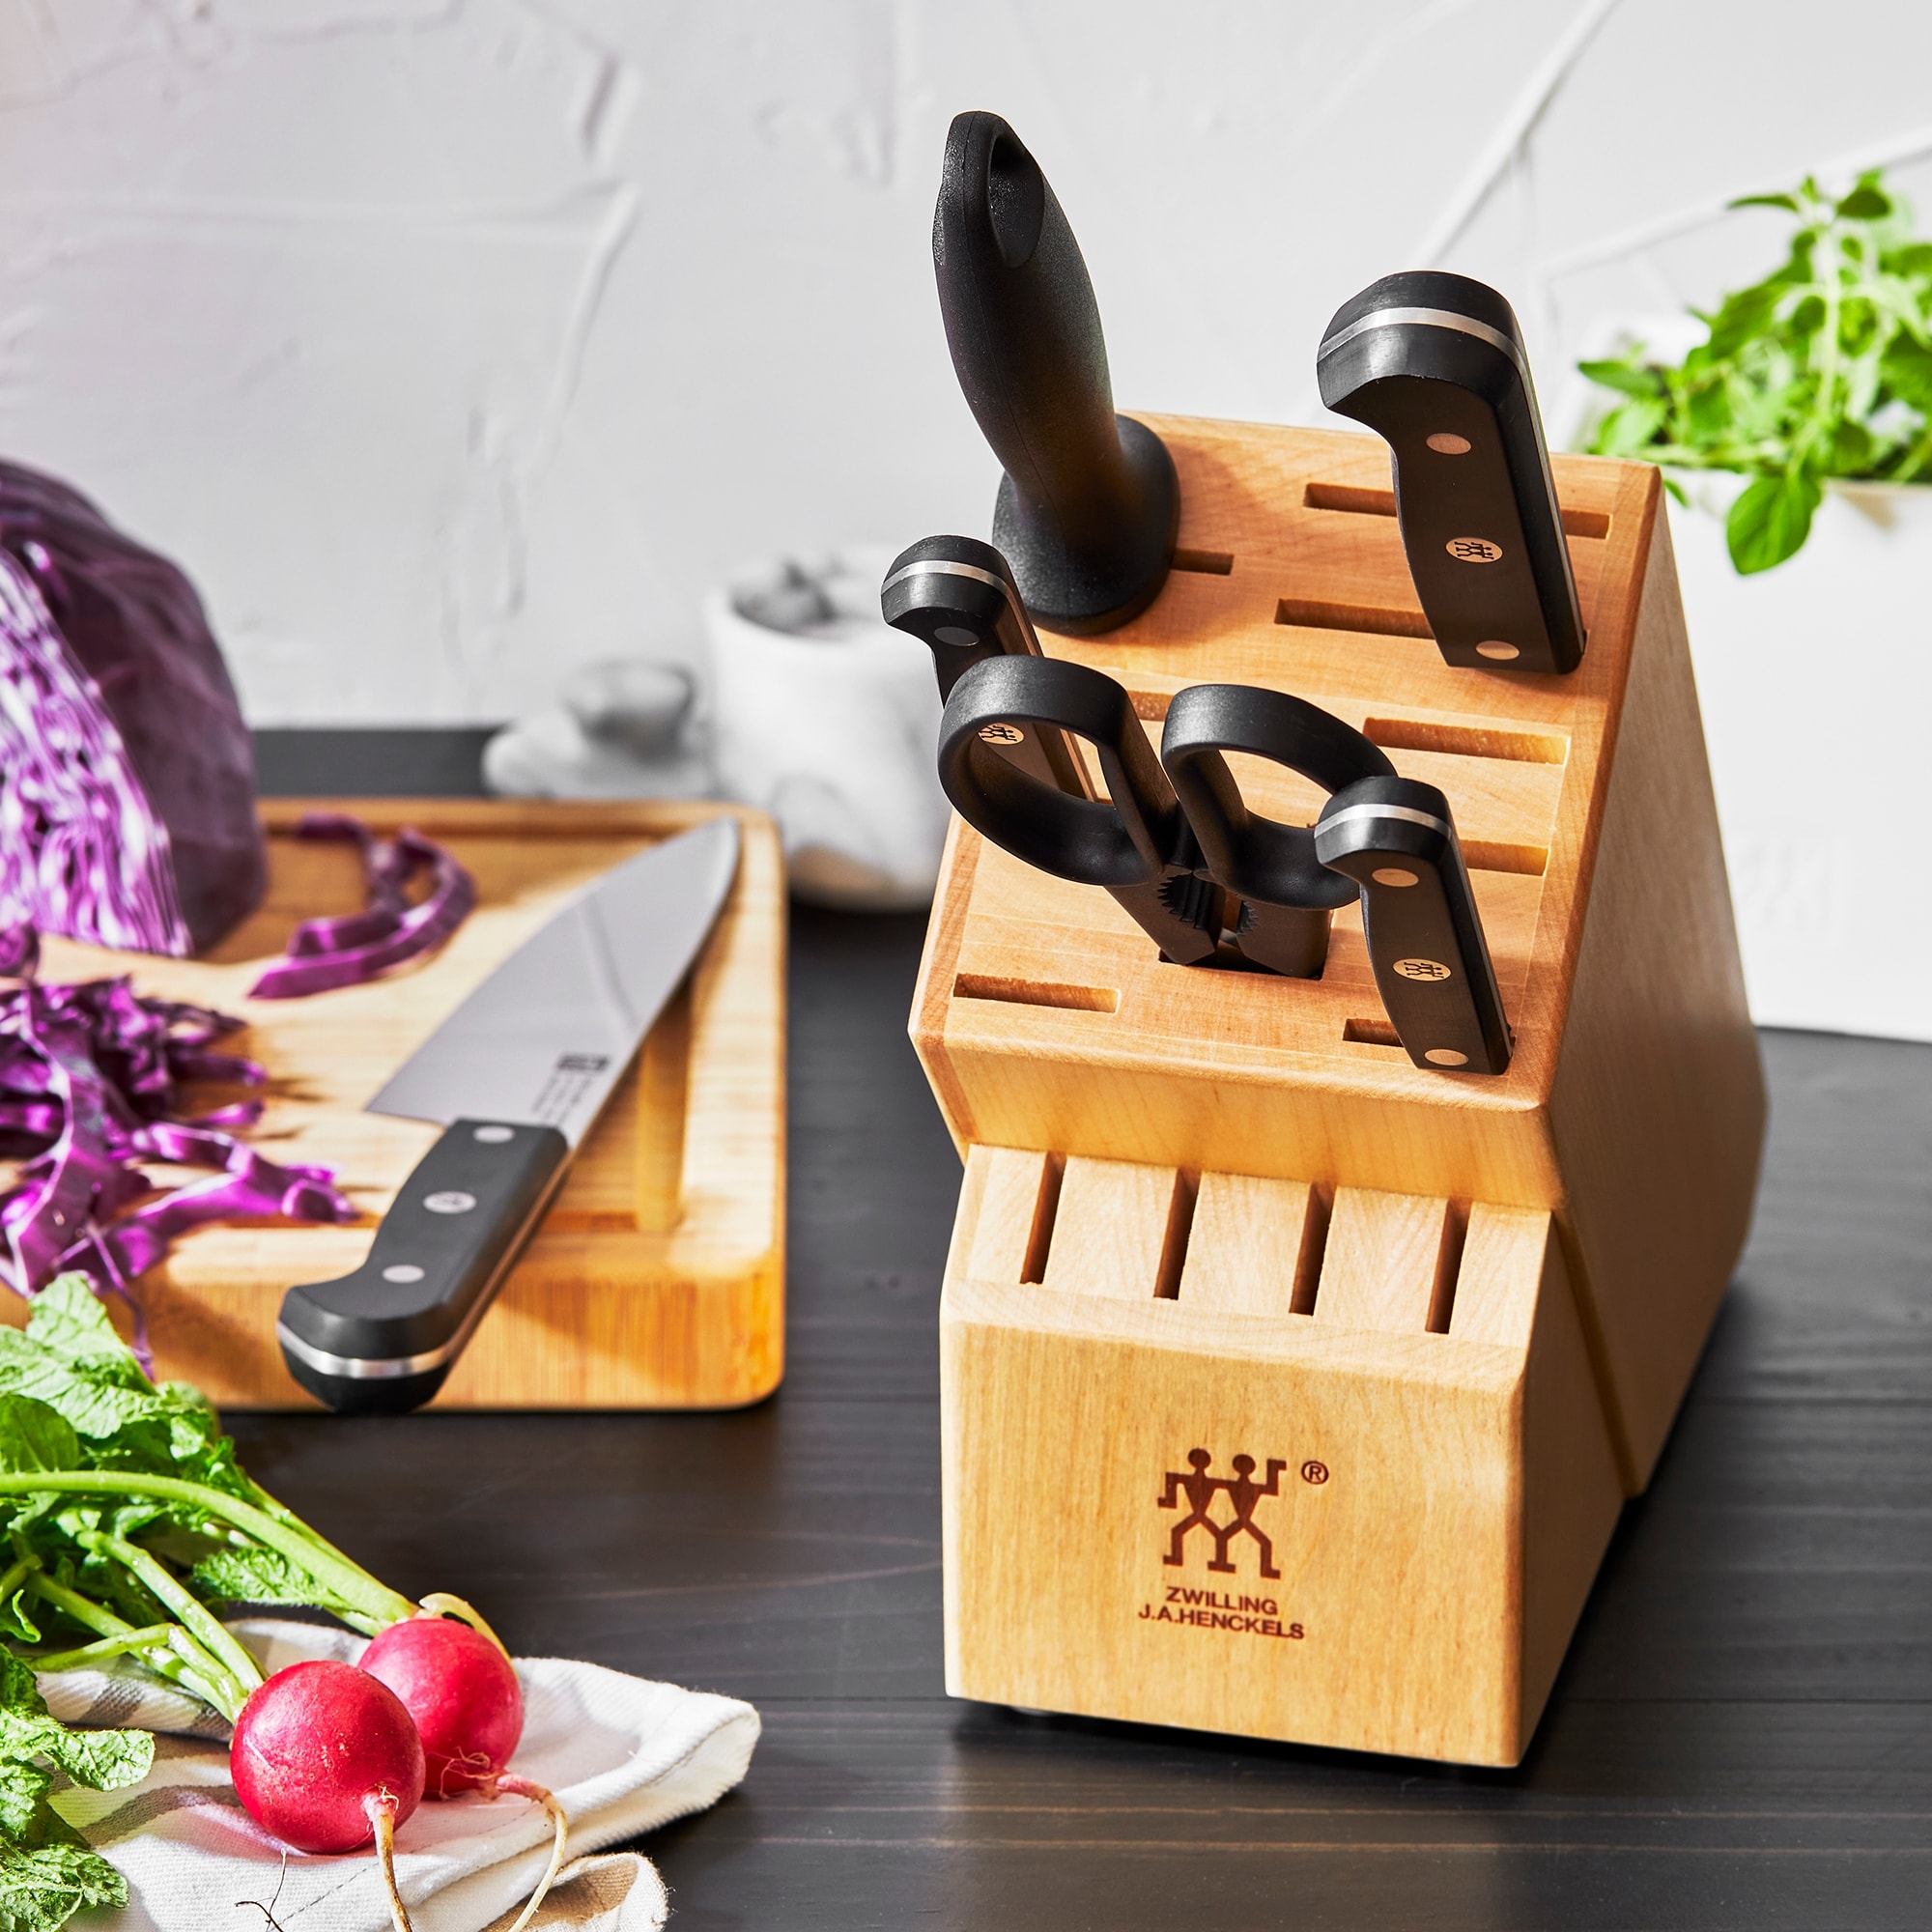 https://ak1.ostkcdn.com/images/products/is/images/direct/8e0edc4f1912c3eb0ca1020456c78371314ffc43/ZWILLING-Gourmet-7-pc-Knife-Block-Set.jpg